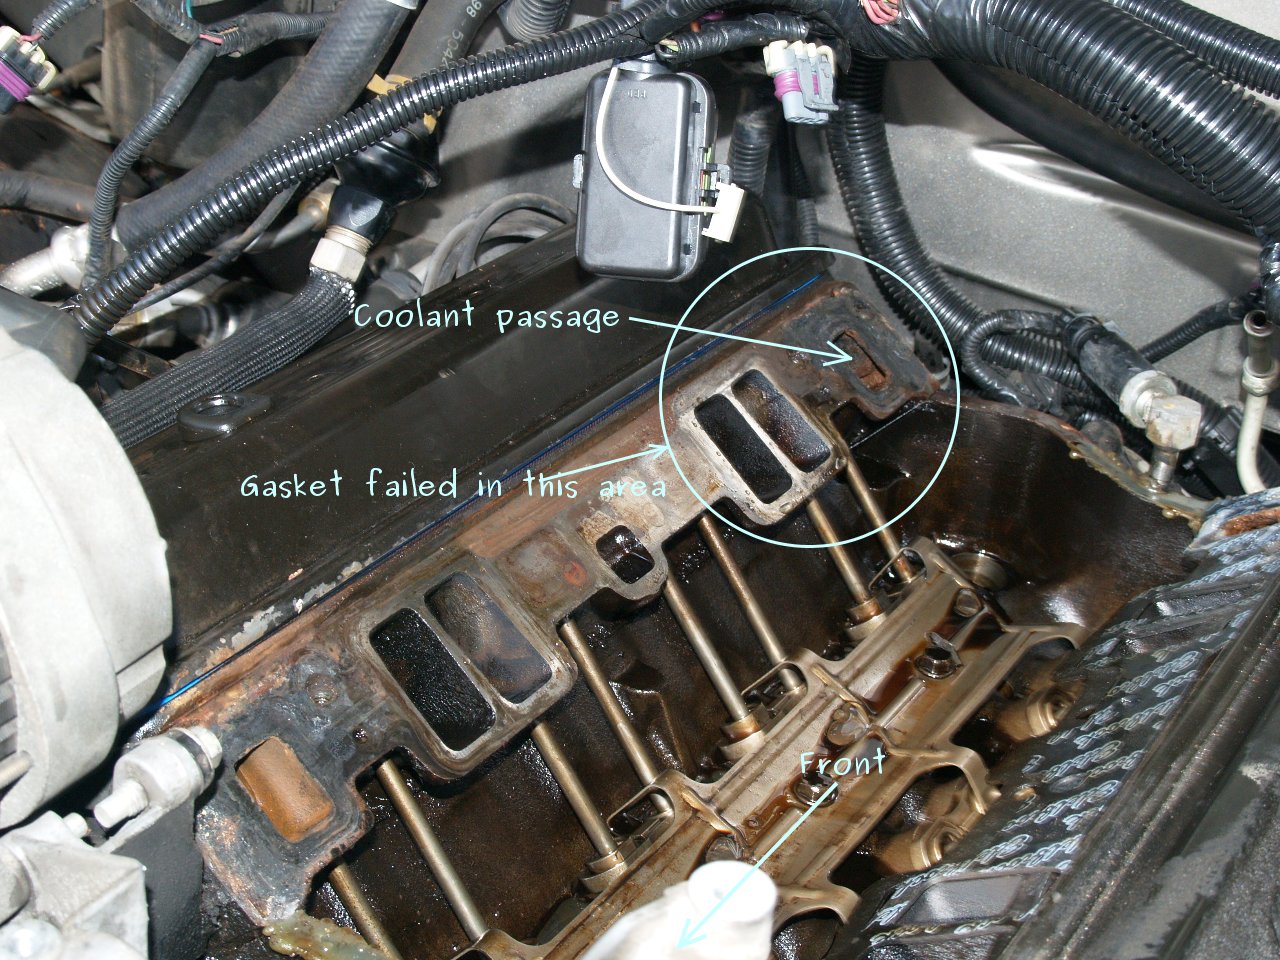 See P295F in engine